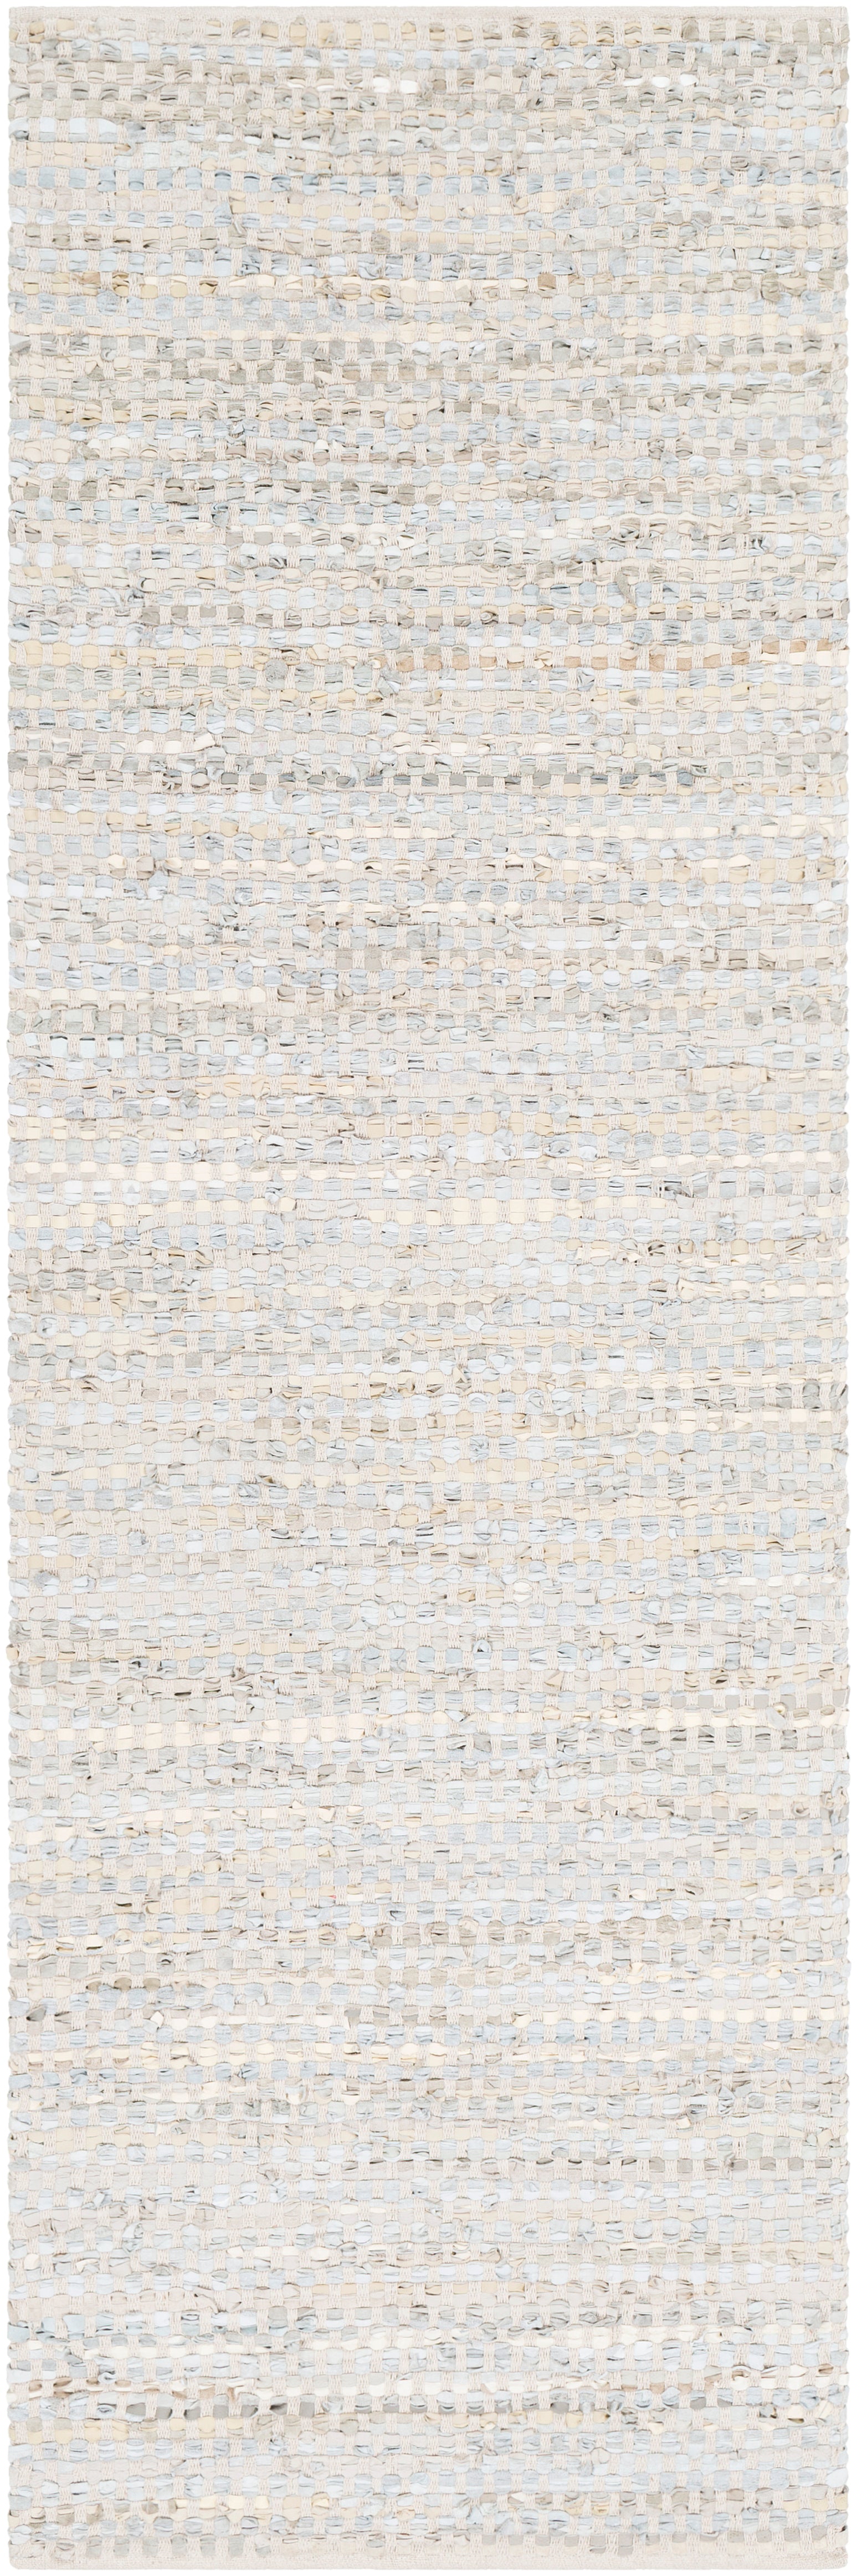 Livabliss Jamie Hides and Leather Gray JMI-8005 Area Rug